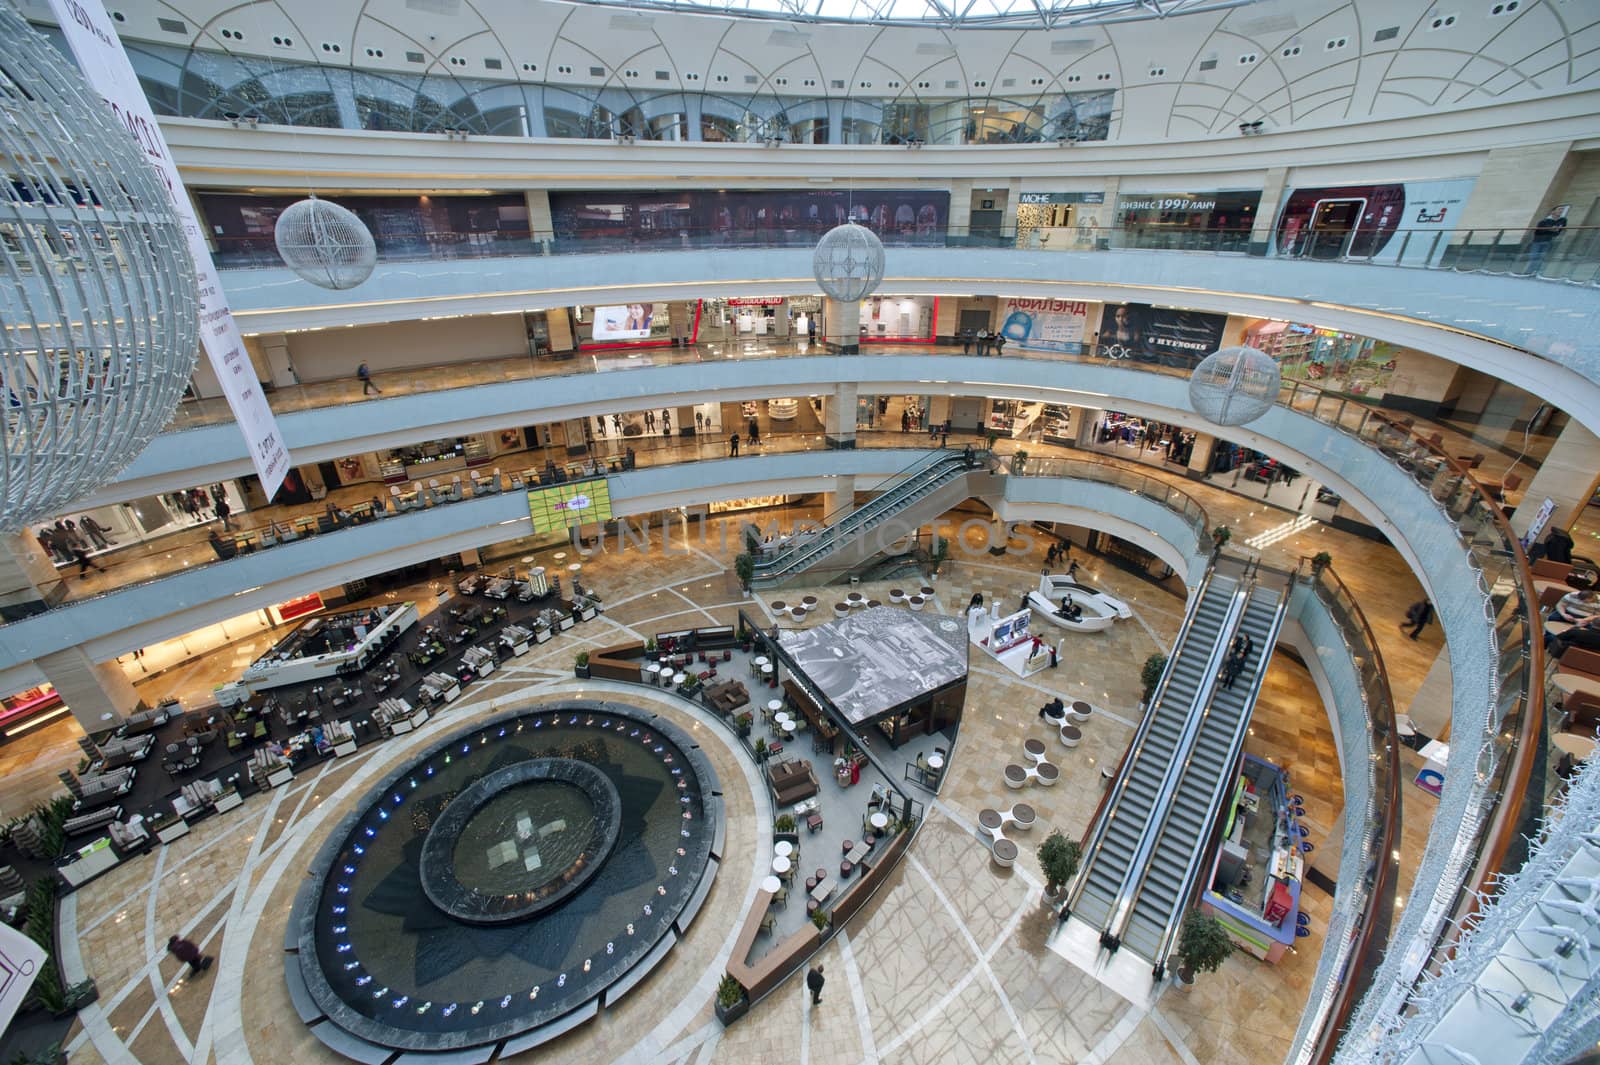 Big Moscow shopping mall by Alenmax